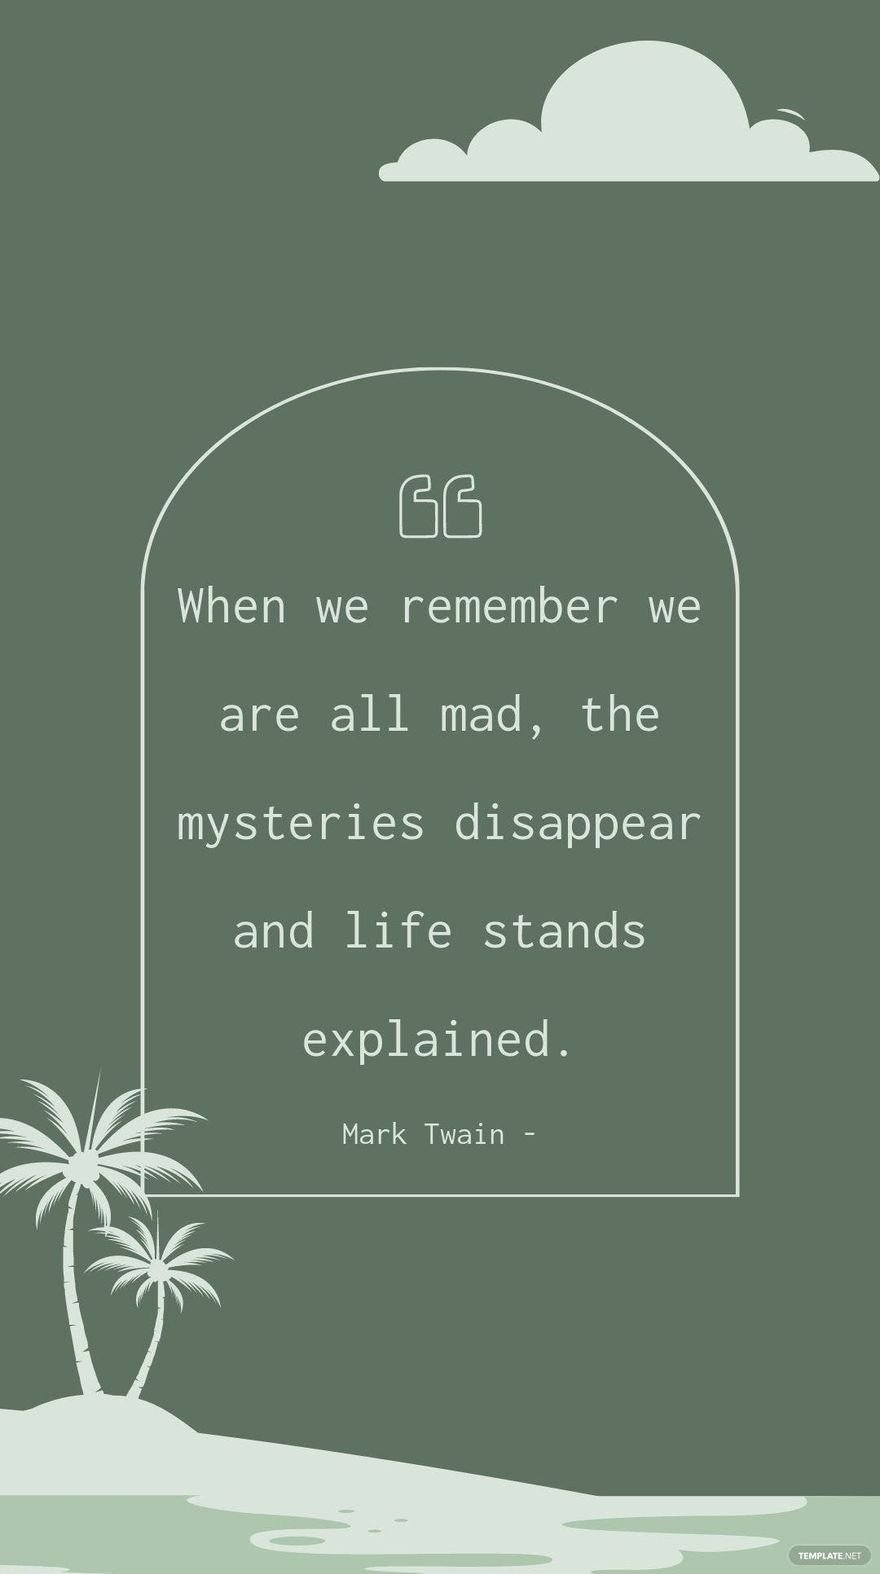 Mark Twain - When we remember we are all mad, the mysteries disappear and life stands explained.